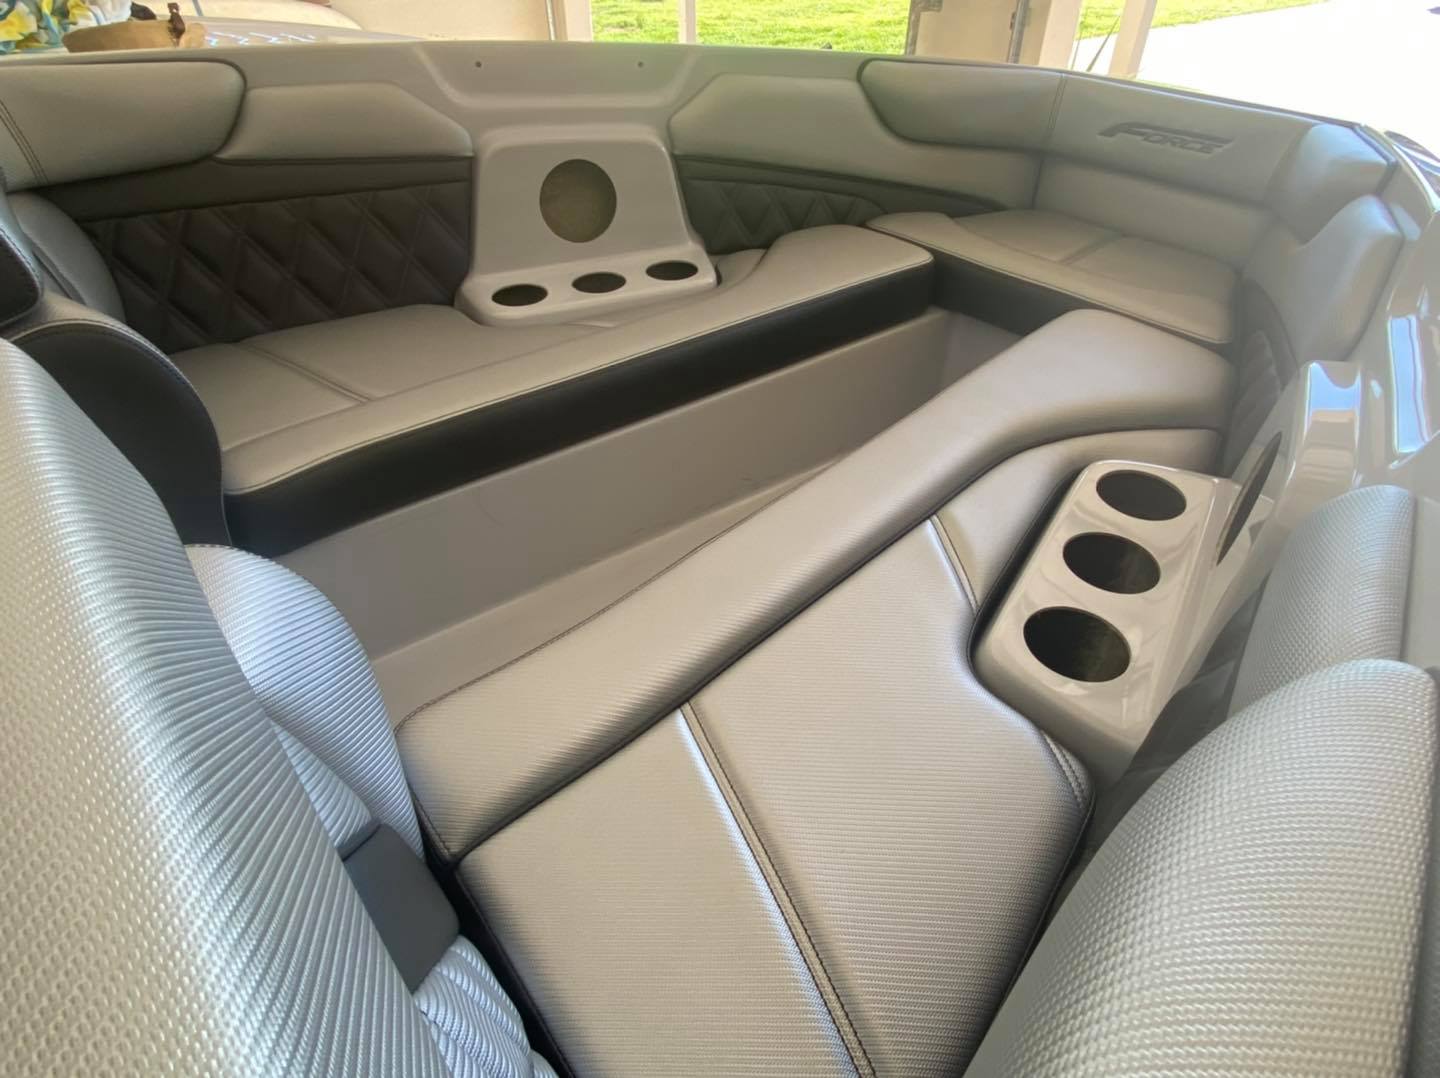 Pure excitement as we show you our latest F21XB as it moves through the fit out stage.  Silver with splashes of Charcoal and the detail of the diamond stitching really makes this interior look stylish.